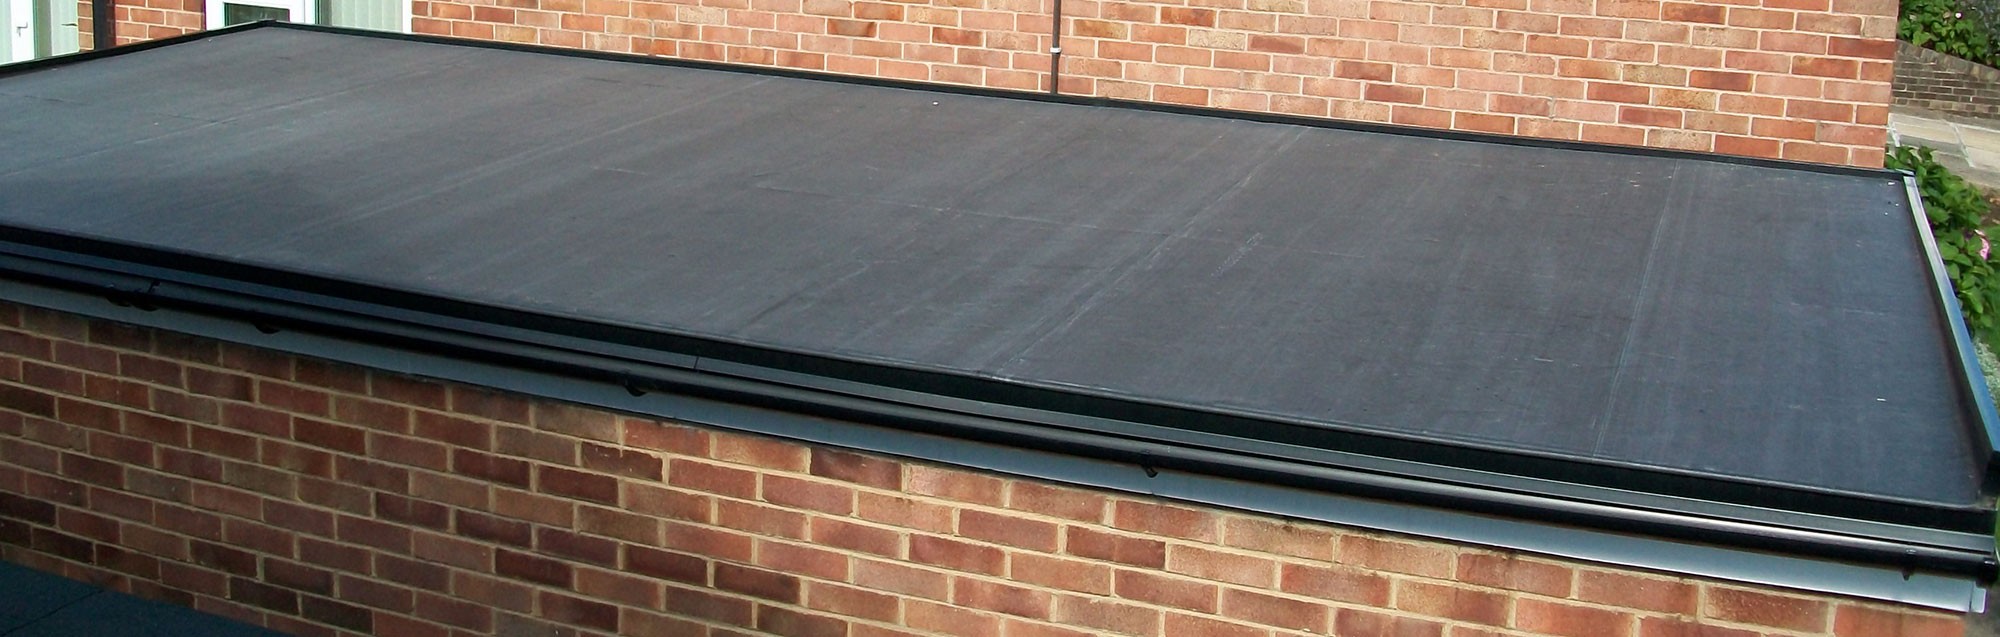 Rubber roof system